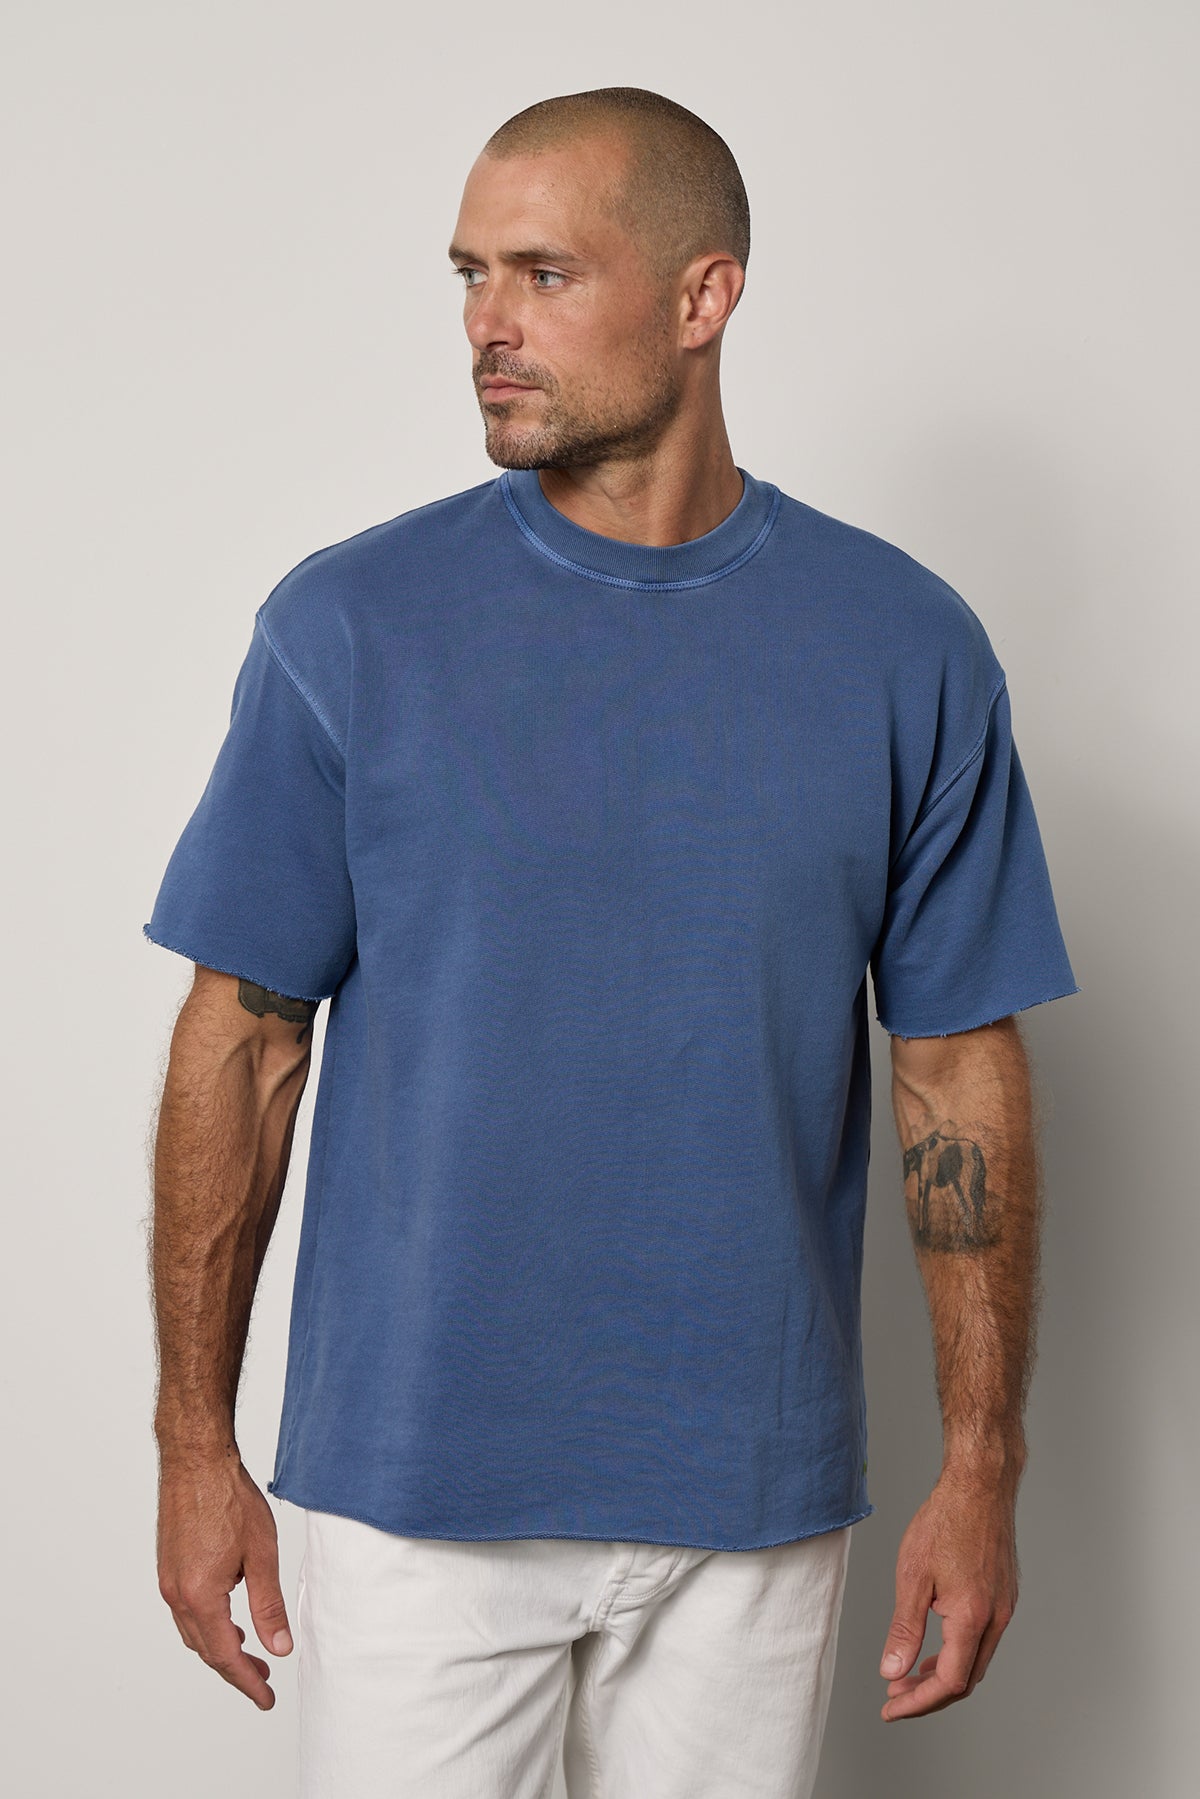 Saul Crew Neck Tee in anchor blue french terry and white denim front-26249401106625